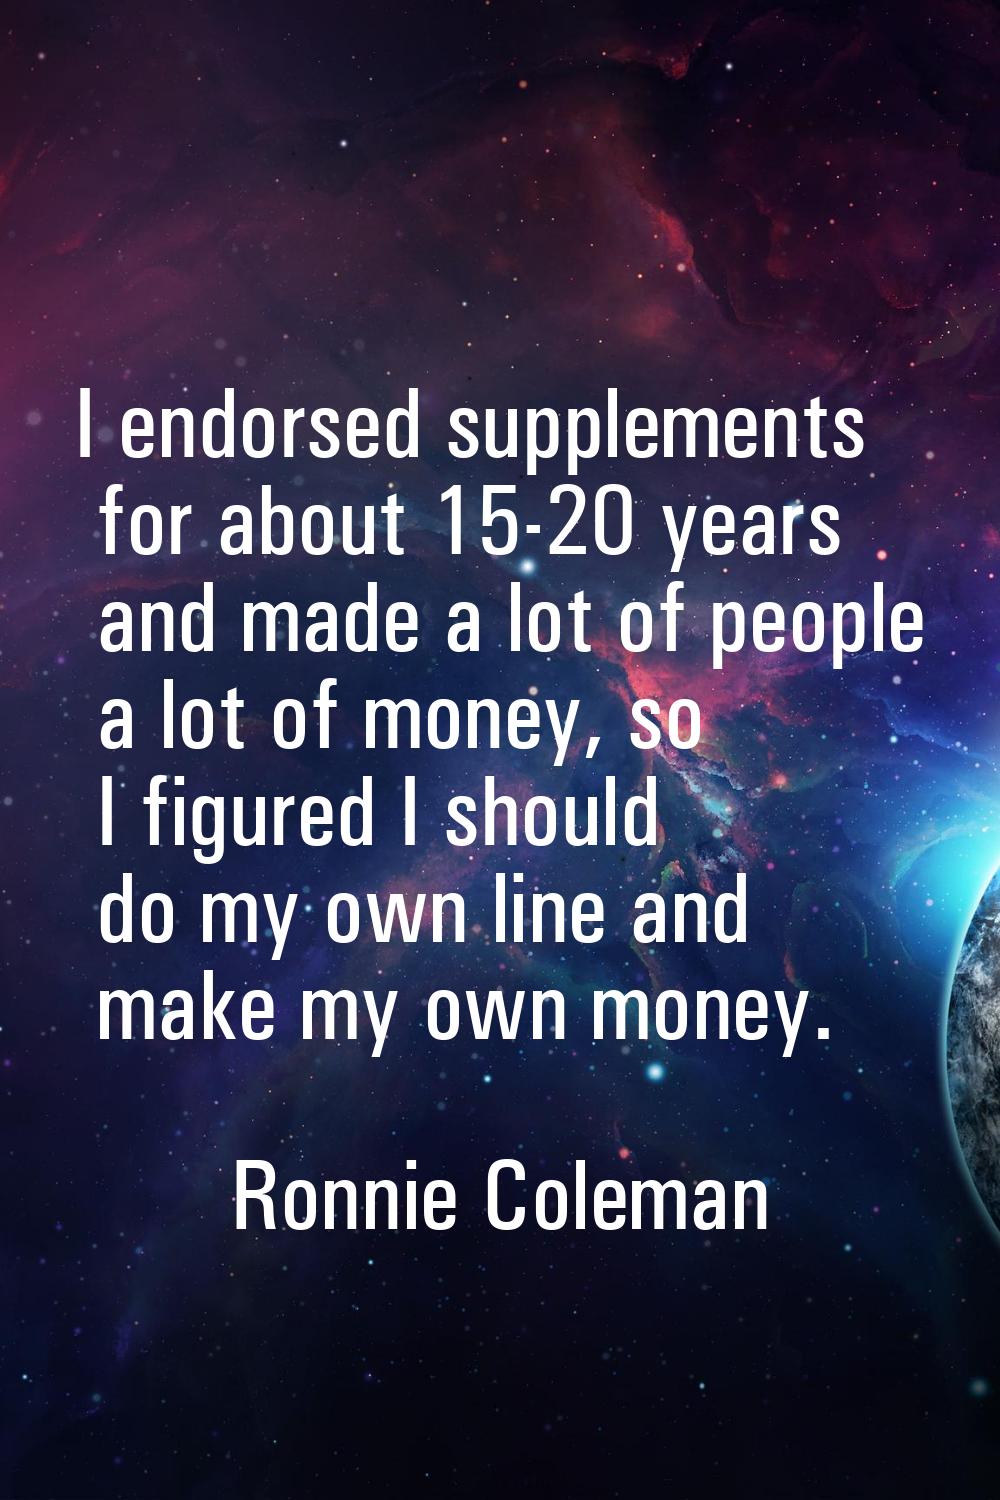 I endorsed supplements for about 15-20 years and made a lot of people a lot of money, so I figured 